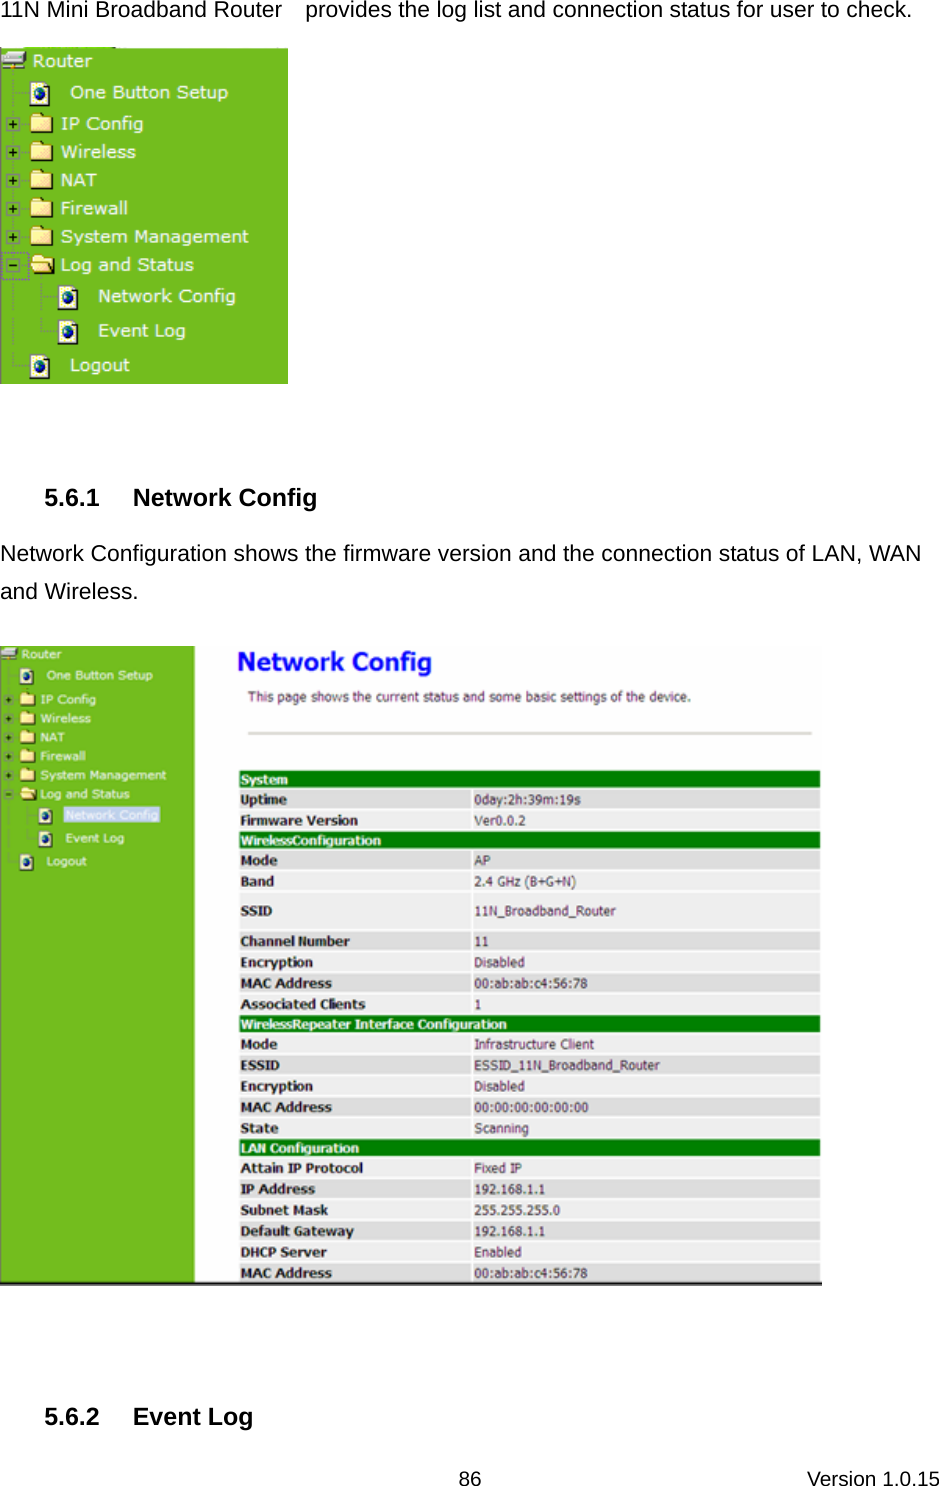 Version 1.0.15 8611N Mini Broadband Router    provides the log list and connection status for user to check.   5.6.1 Network Config Network Configuration shows the firmware version and the connection status of LAN, WAN and Wireless.   5.6.2 Event Log 